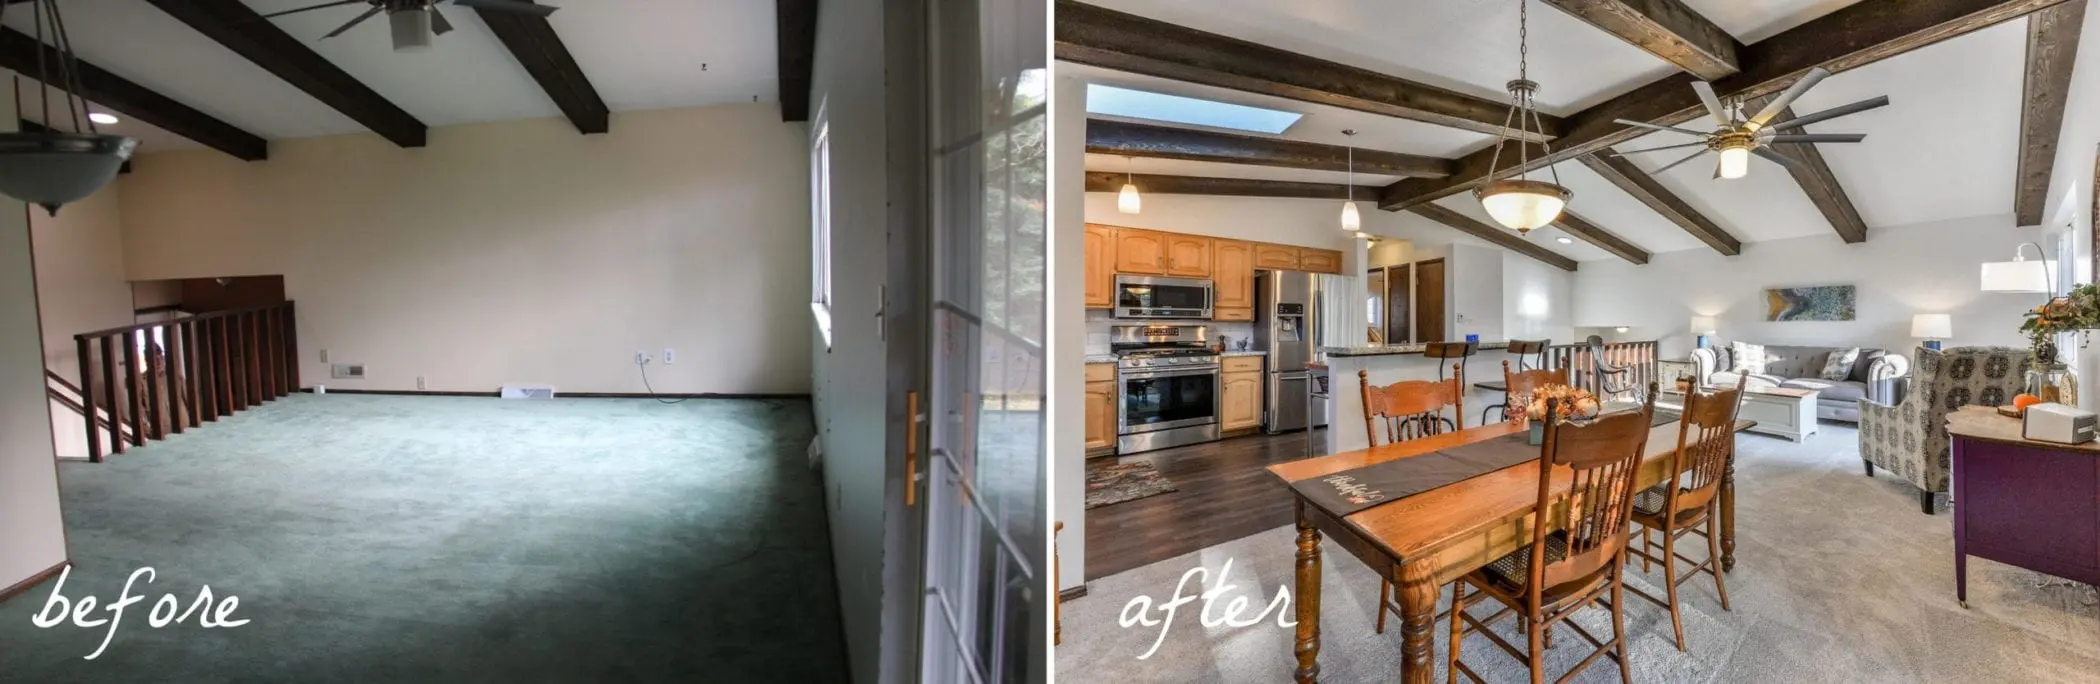 Bi-level renovation before and after